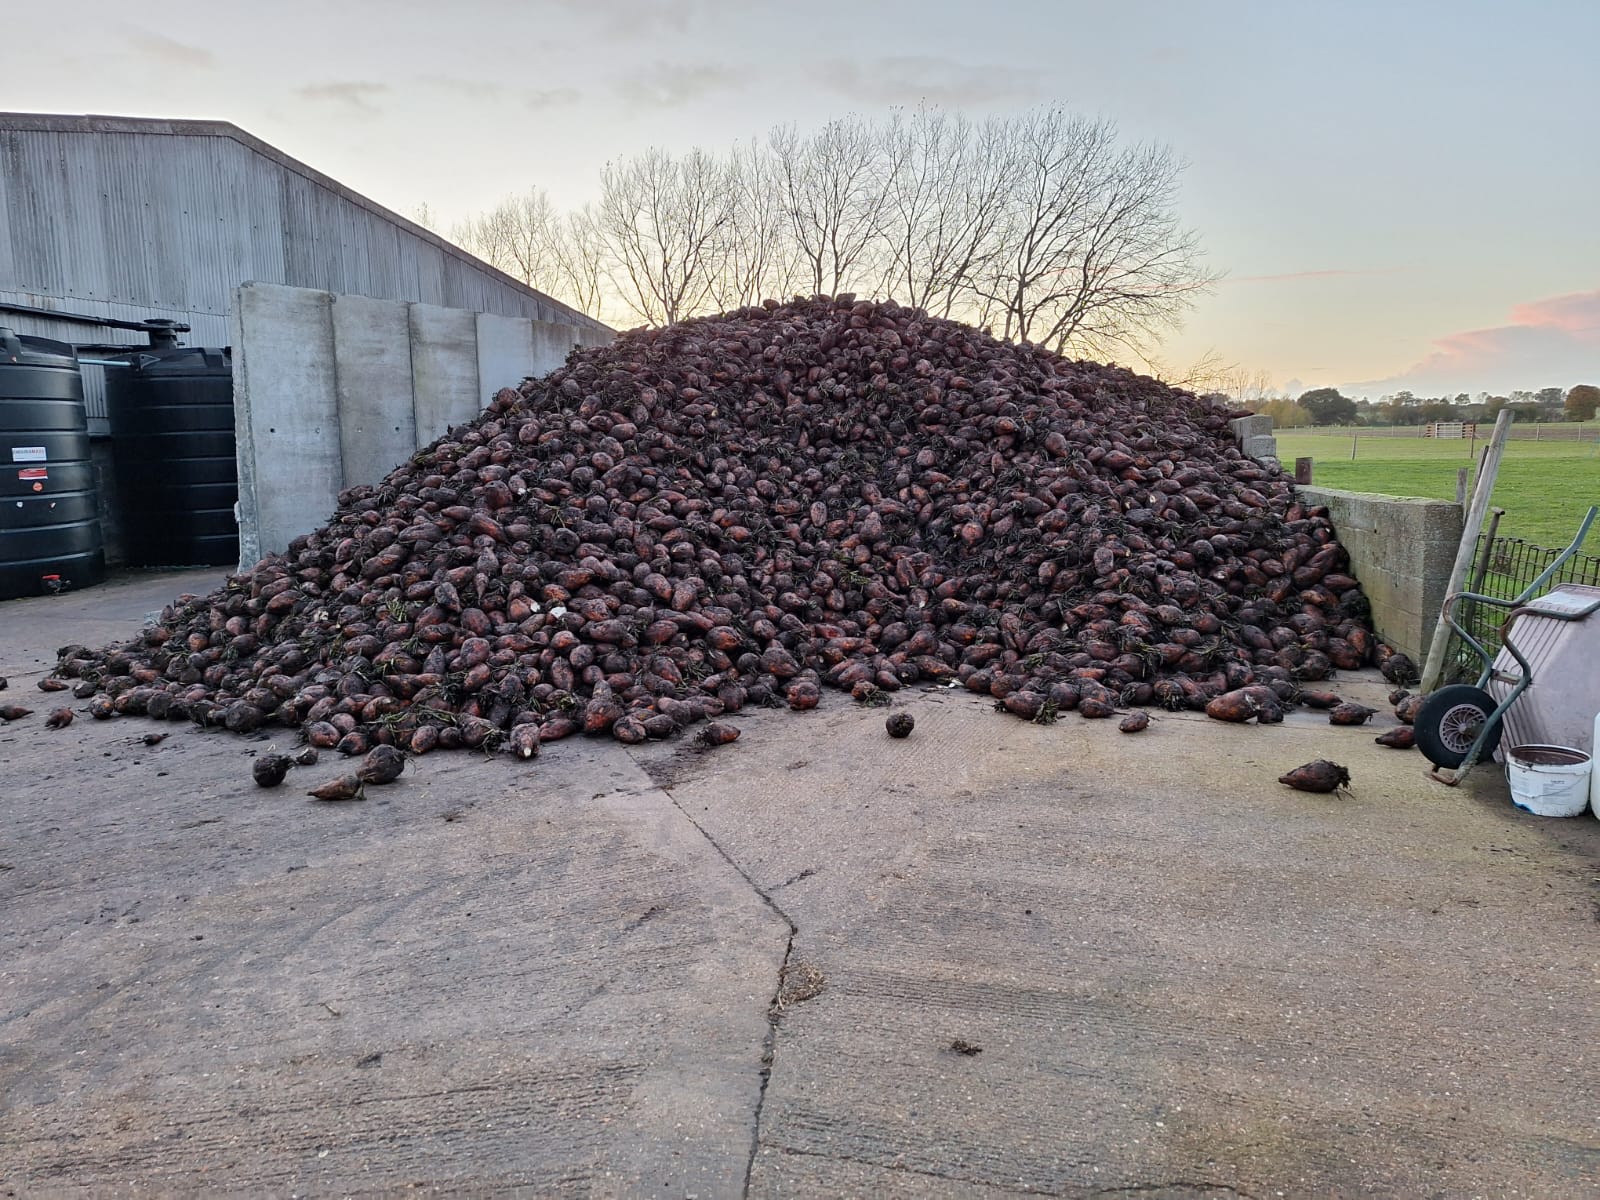 harvested crop of fodder beet, grown by a FarmDroid FD20, ready to be fed to sheep